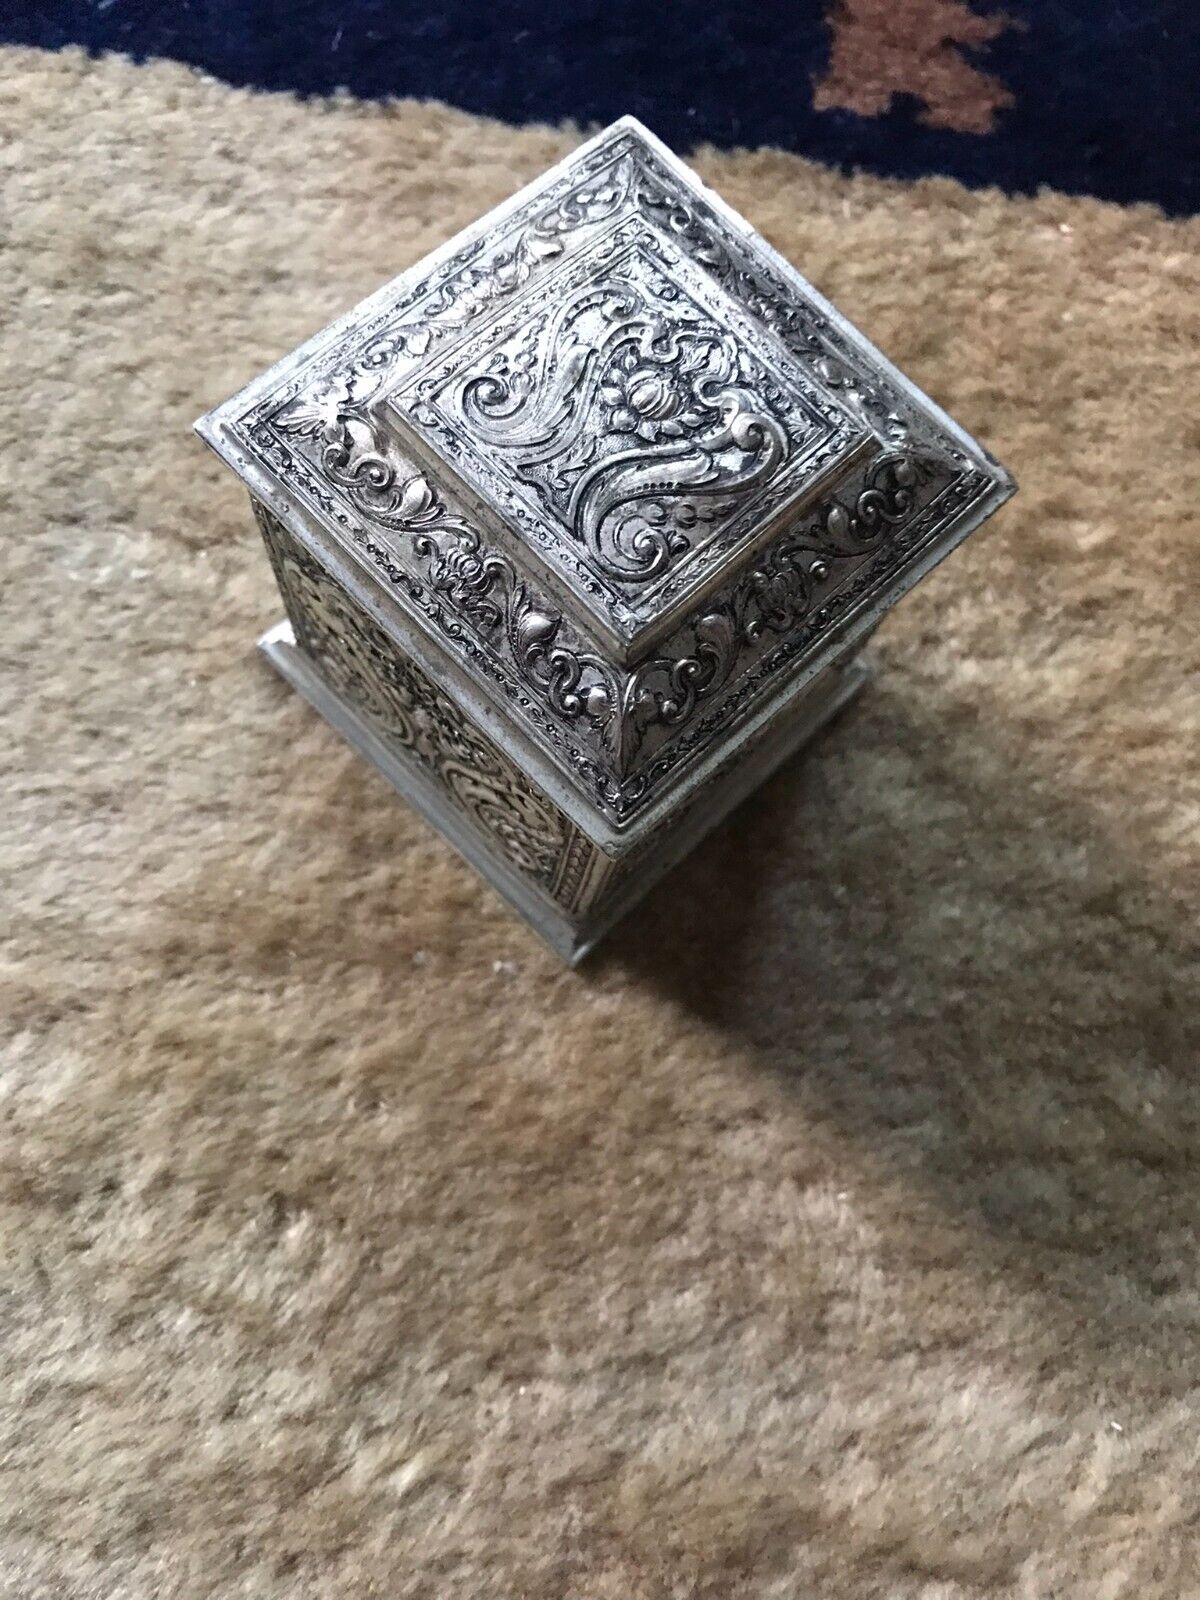 Antique / Vintage Silver Plated Inkwell by Barbour S. P. Co International S. Co